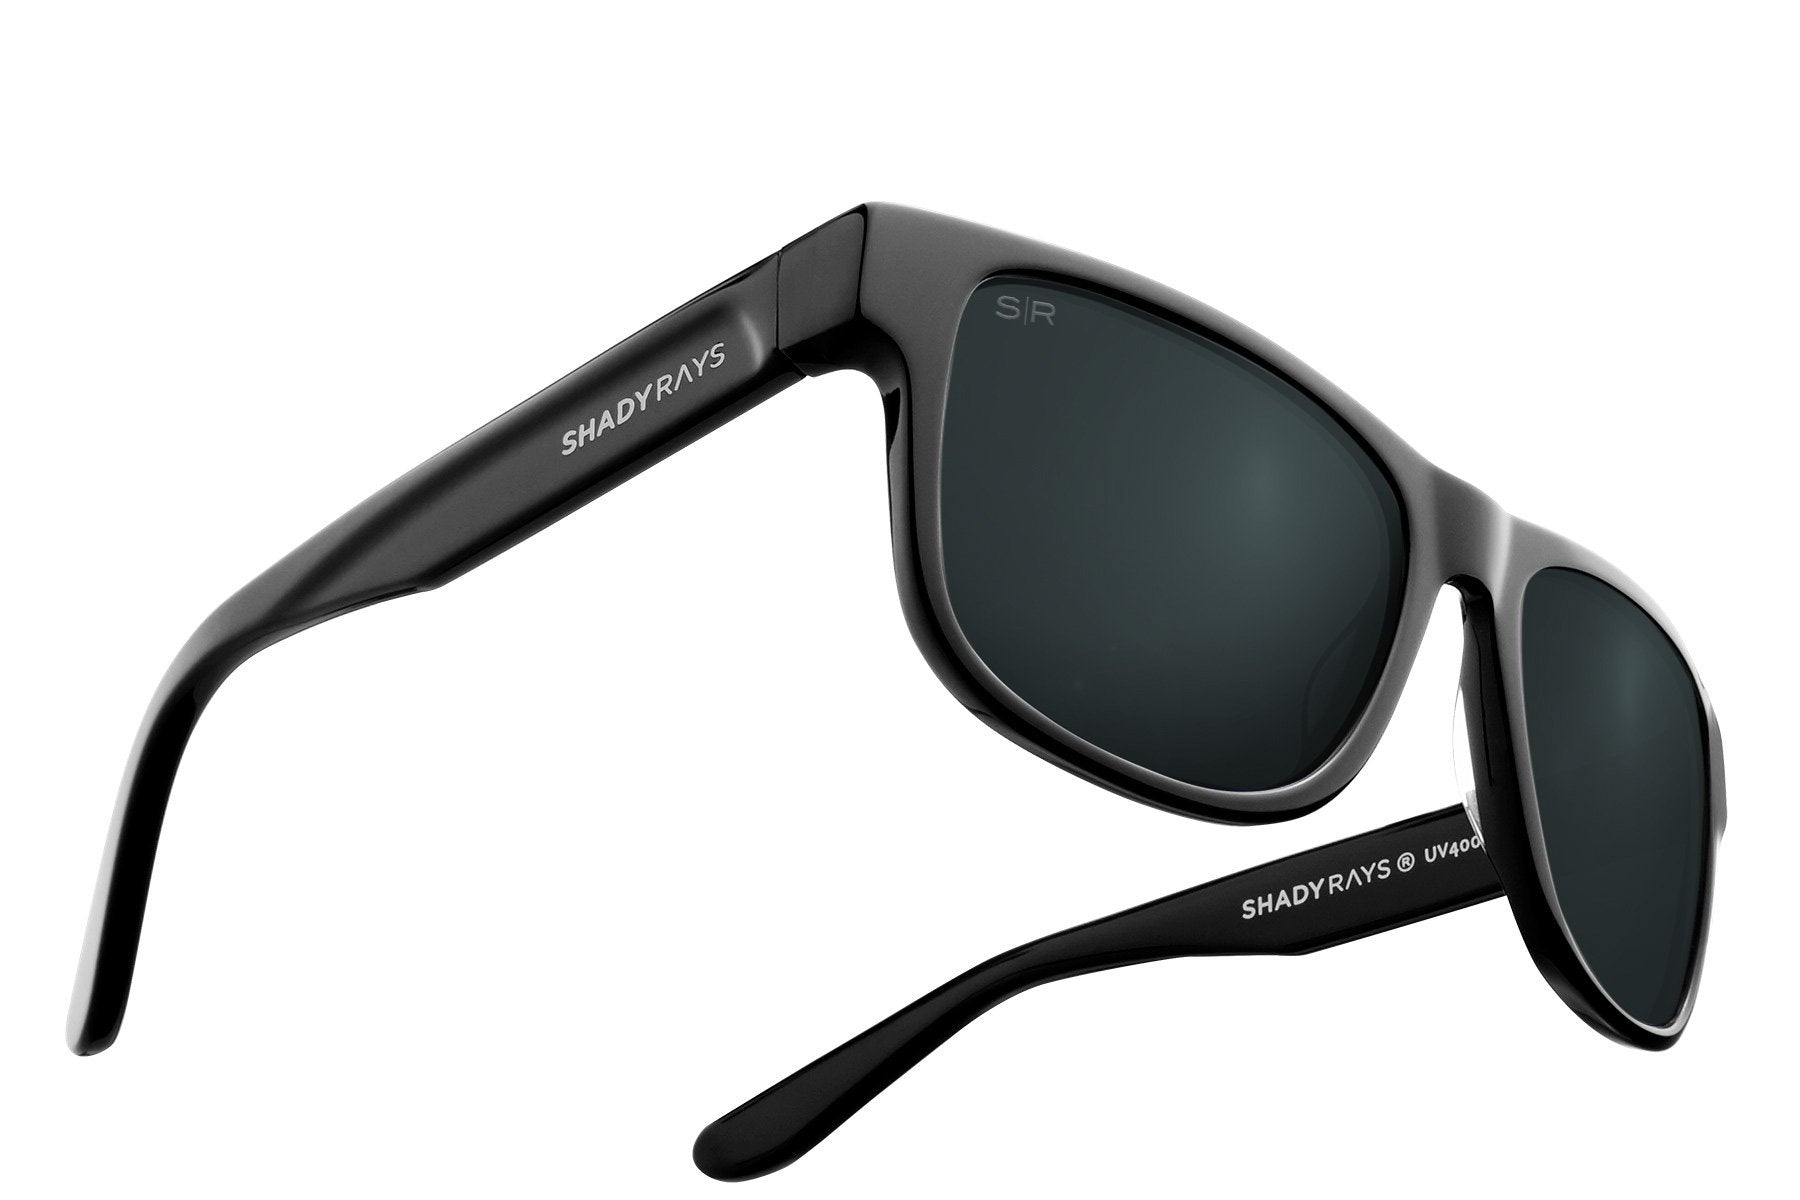 Ventura - Blackout Polarized Sunglasses | Black Men's Sunglasses | Christmas Gifts for Boyfriend | Gifts for Him | Unique Gifts for Husband | Shady